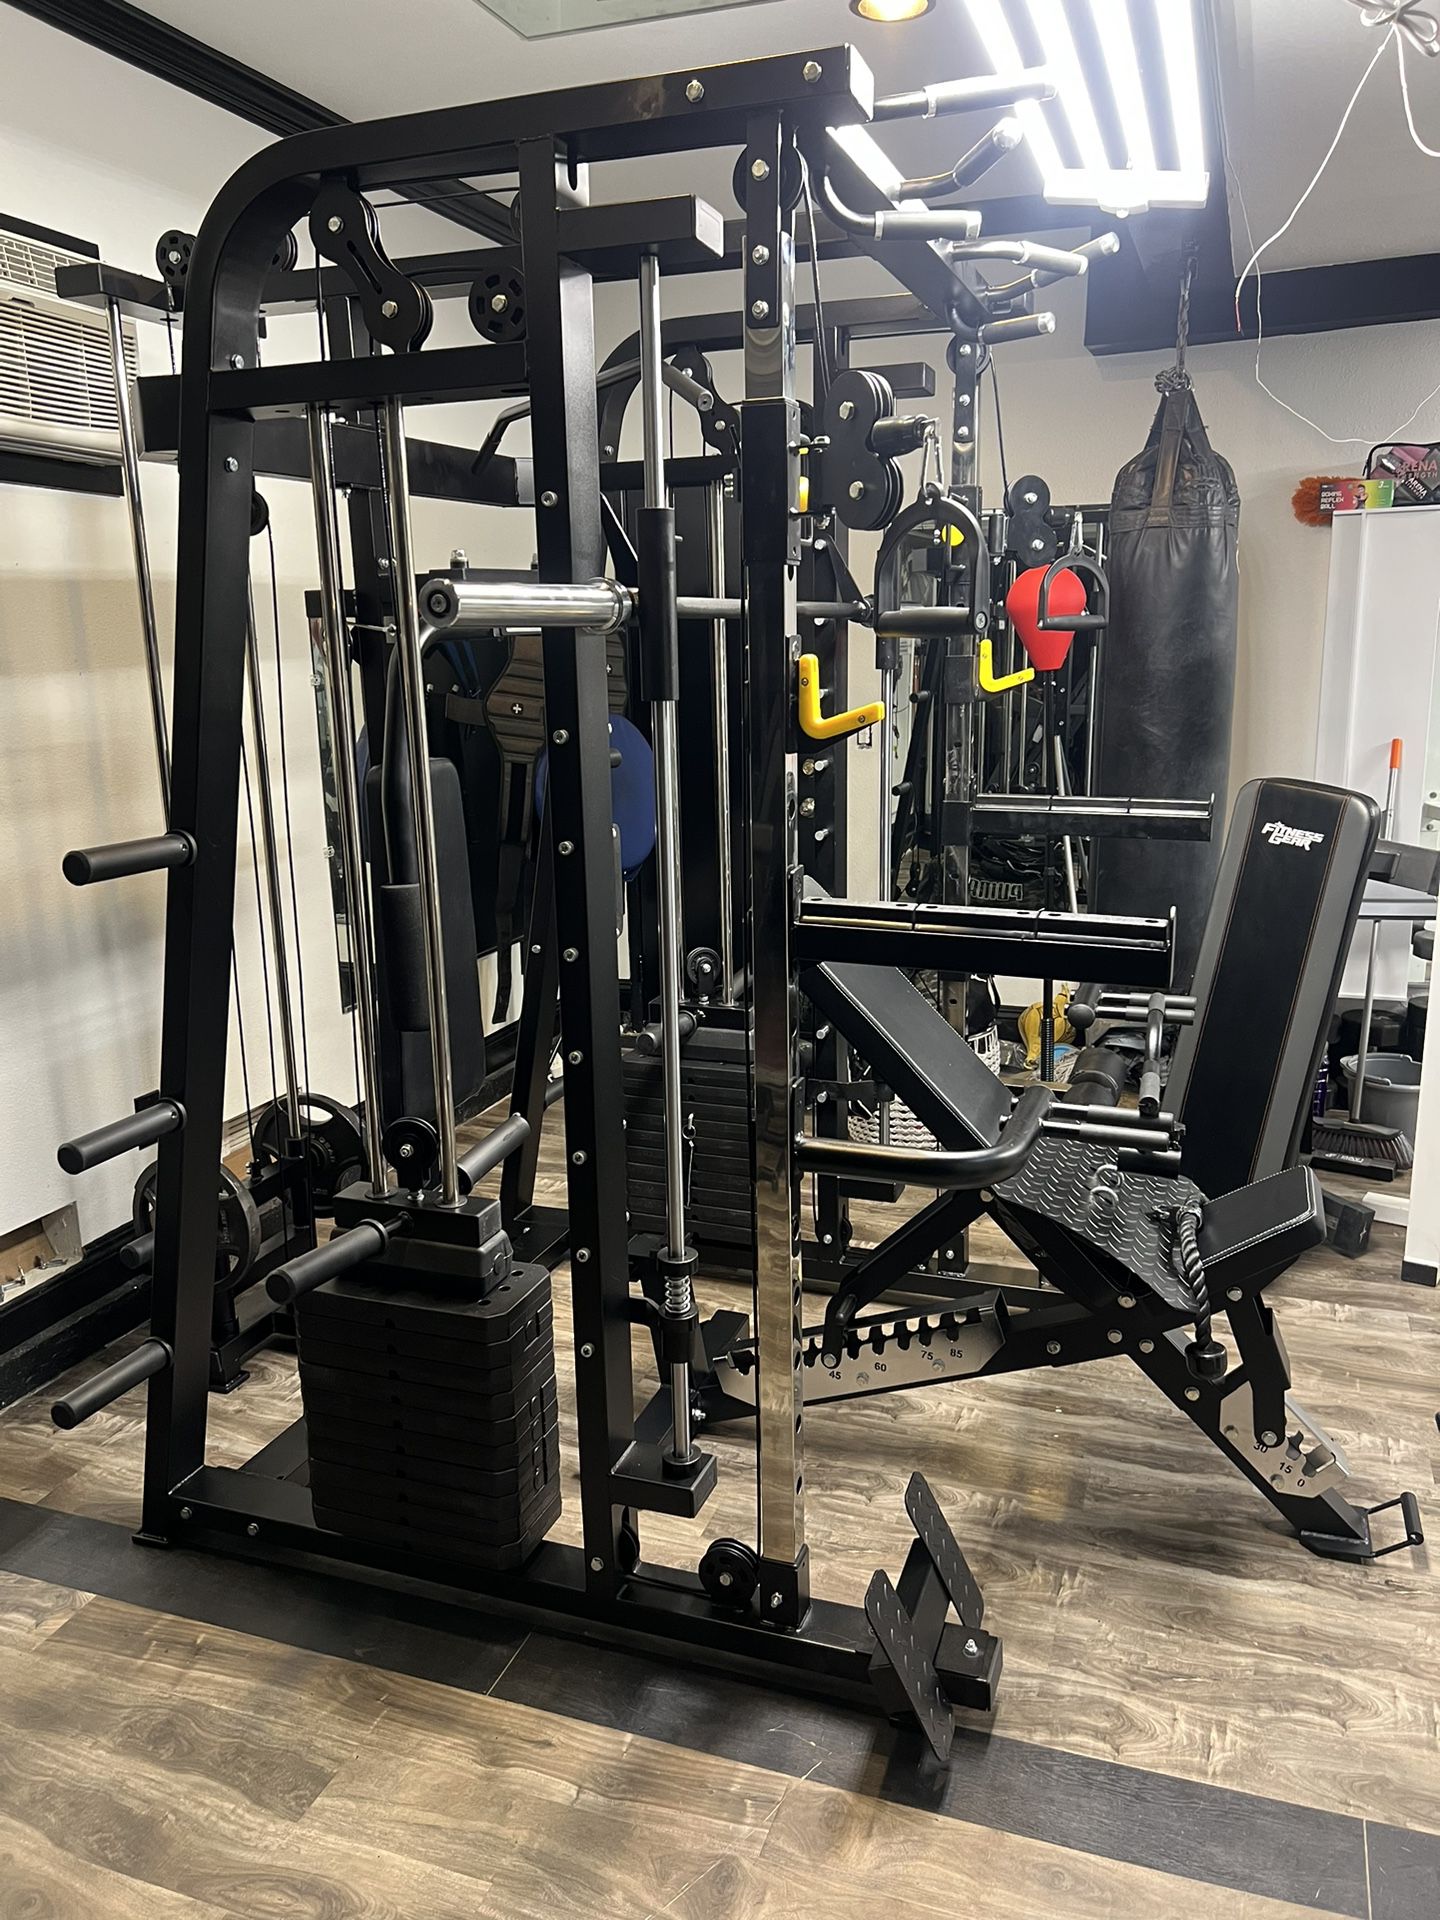 Smith Machine 300 | Adjustable Bench | 245lb Cast Iron Olympic Weights | 7ft Olympic Bar | Fitness | Gym Equipment | FREE DELIVERY 🚚 